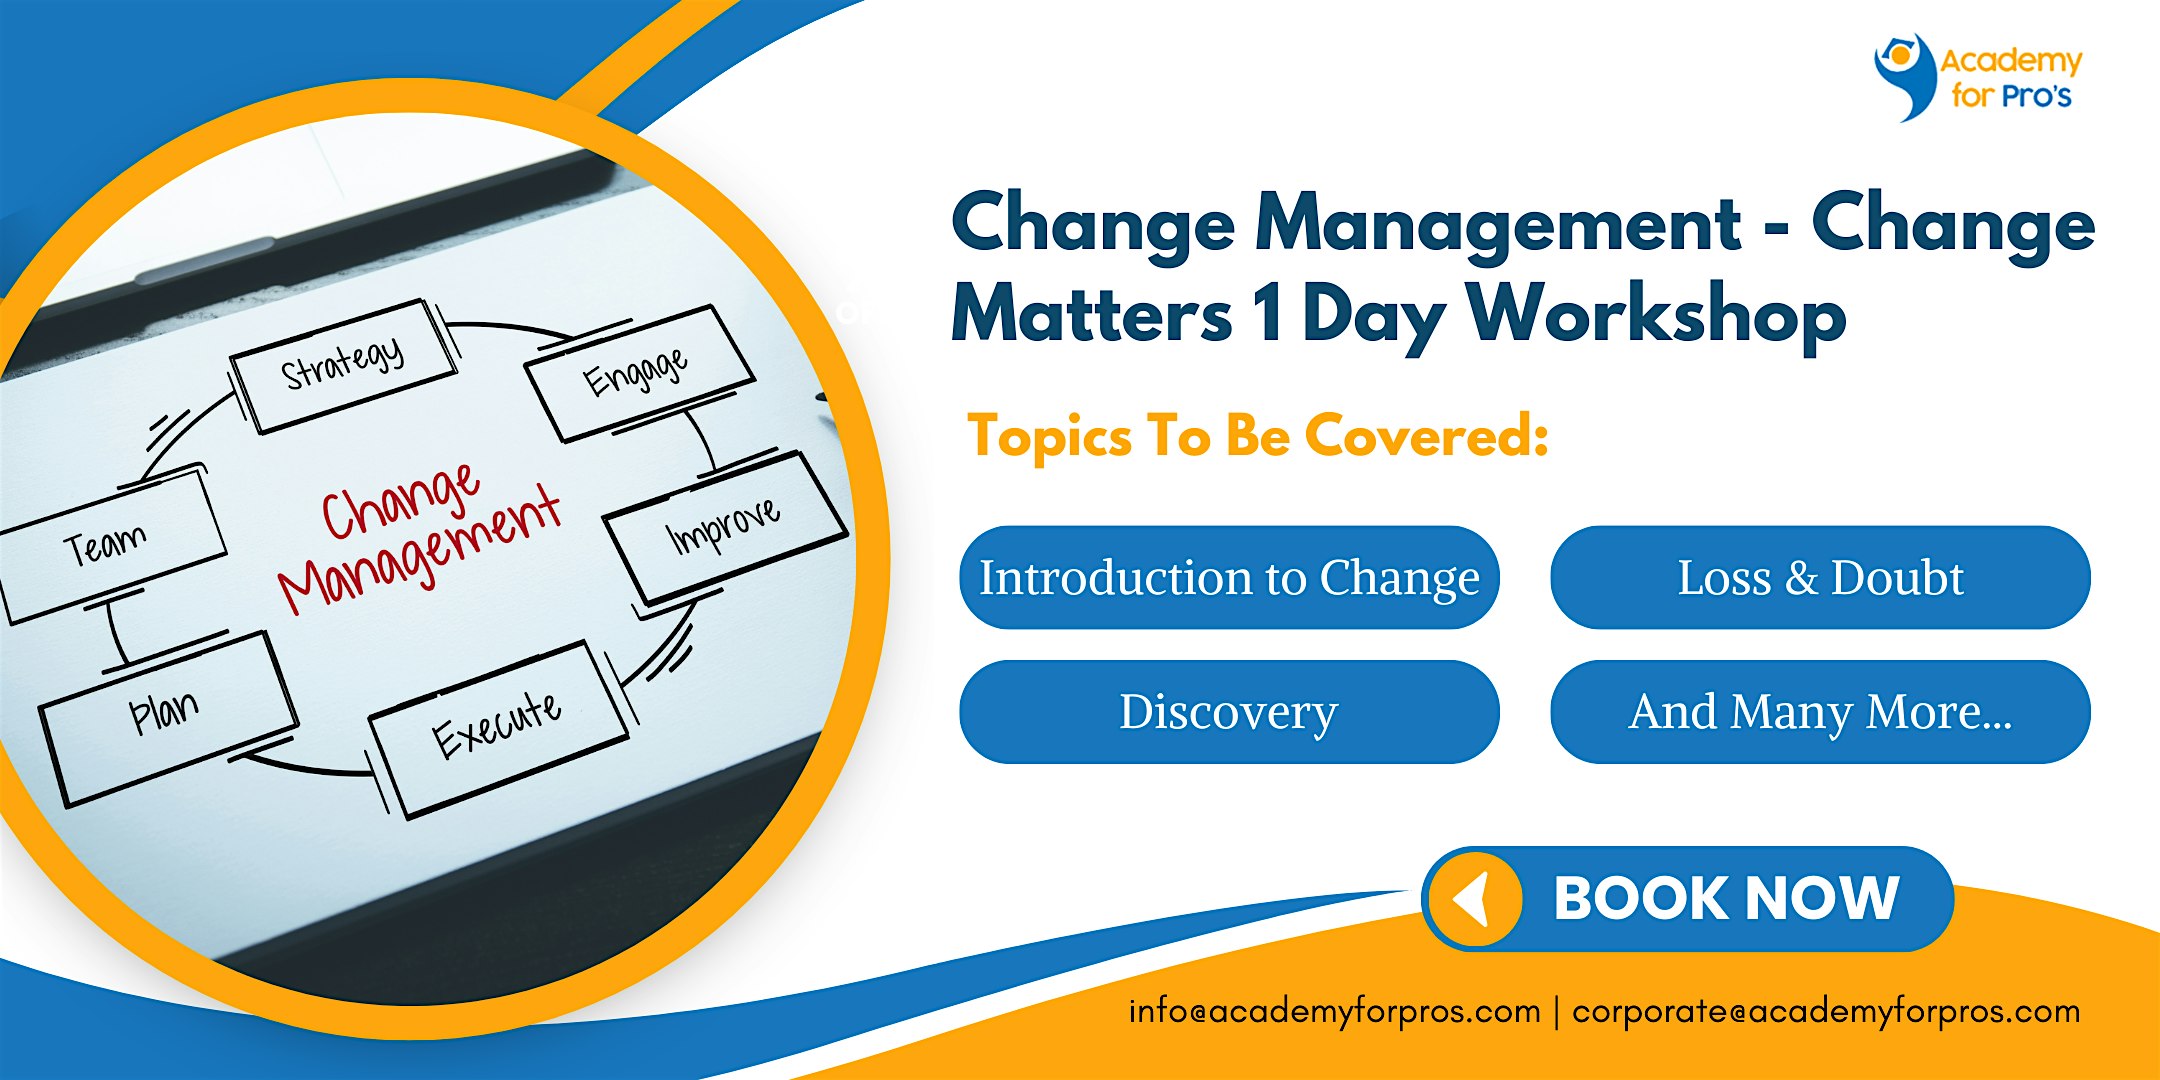 Change Management - Change Matters 1 Day Workshop in Knoxville, TN